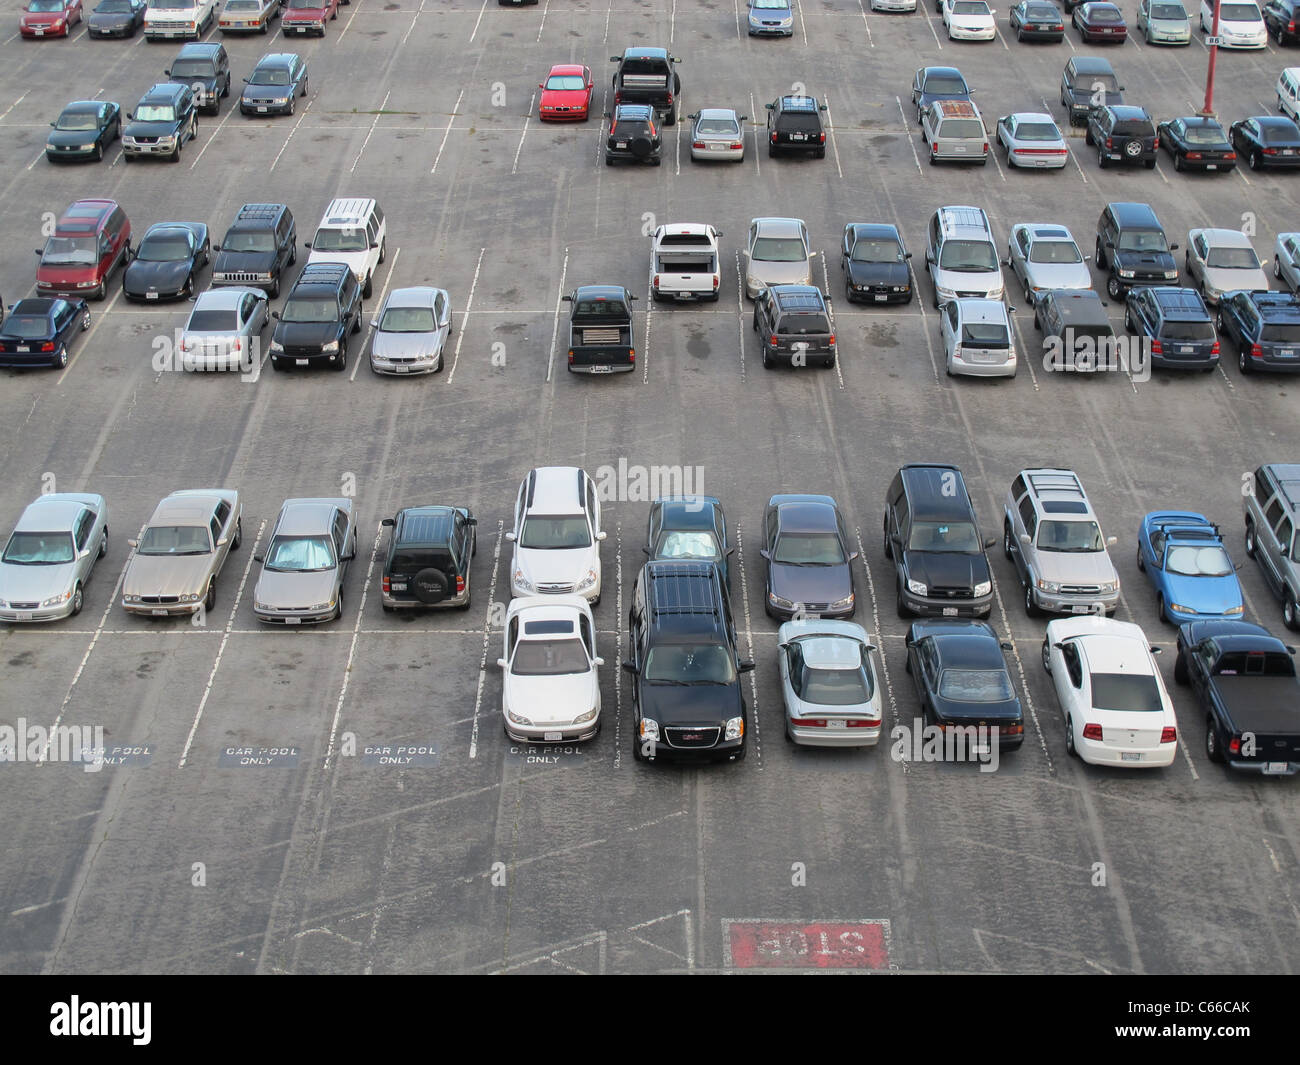 Aerial view of a long term parking lot at SFO airport, San Francisco, California, United States of America Stock Photo